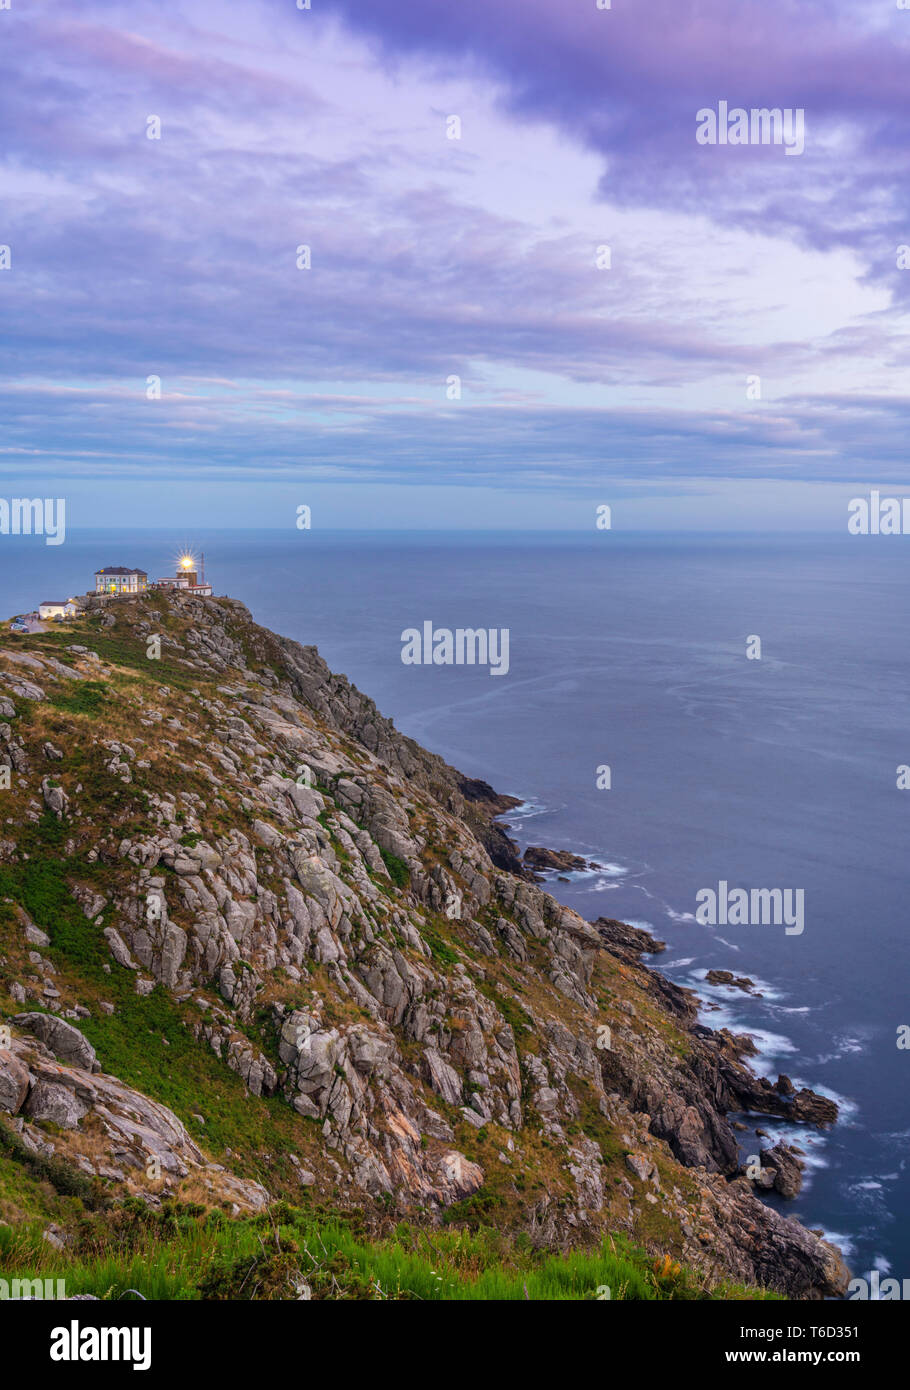 Spain, Galicia, Finisterre, Finisterre lighthouse at dusk Stock Photo